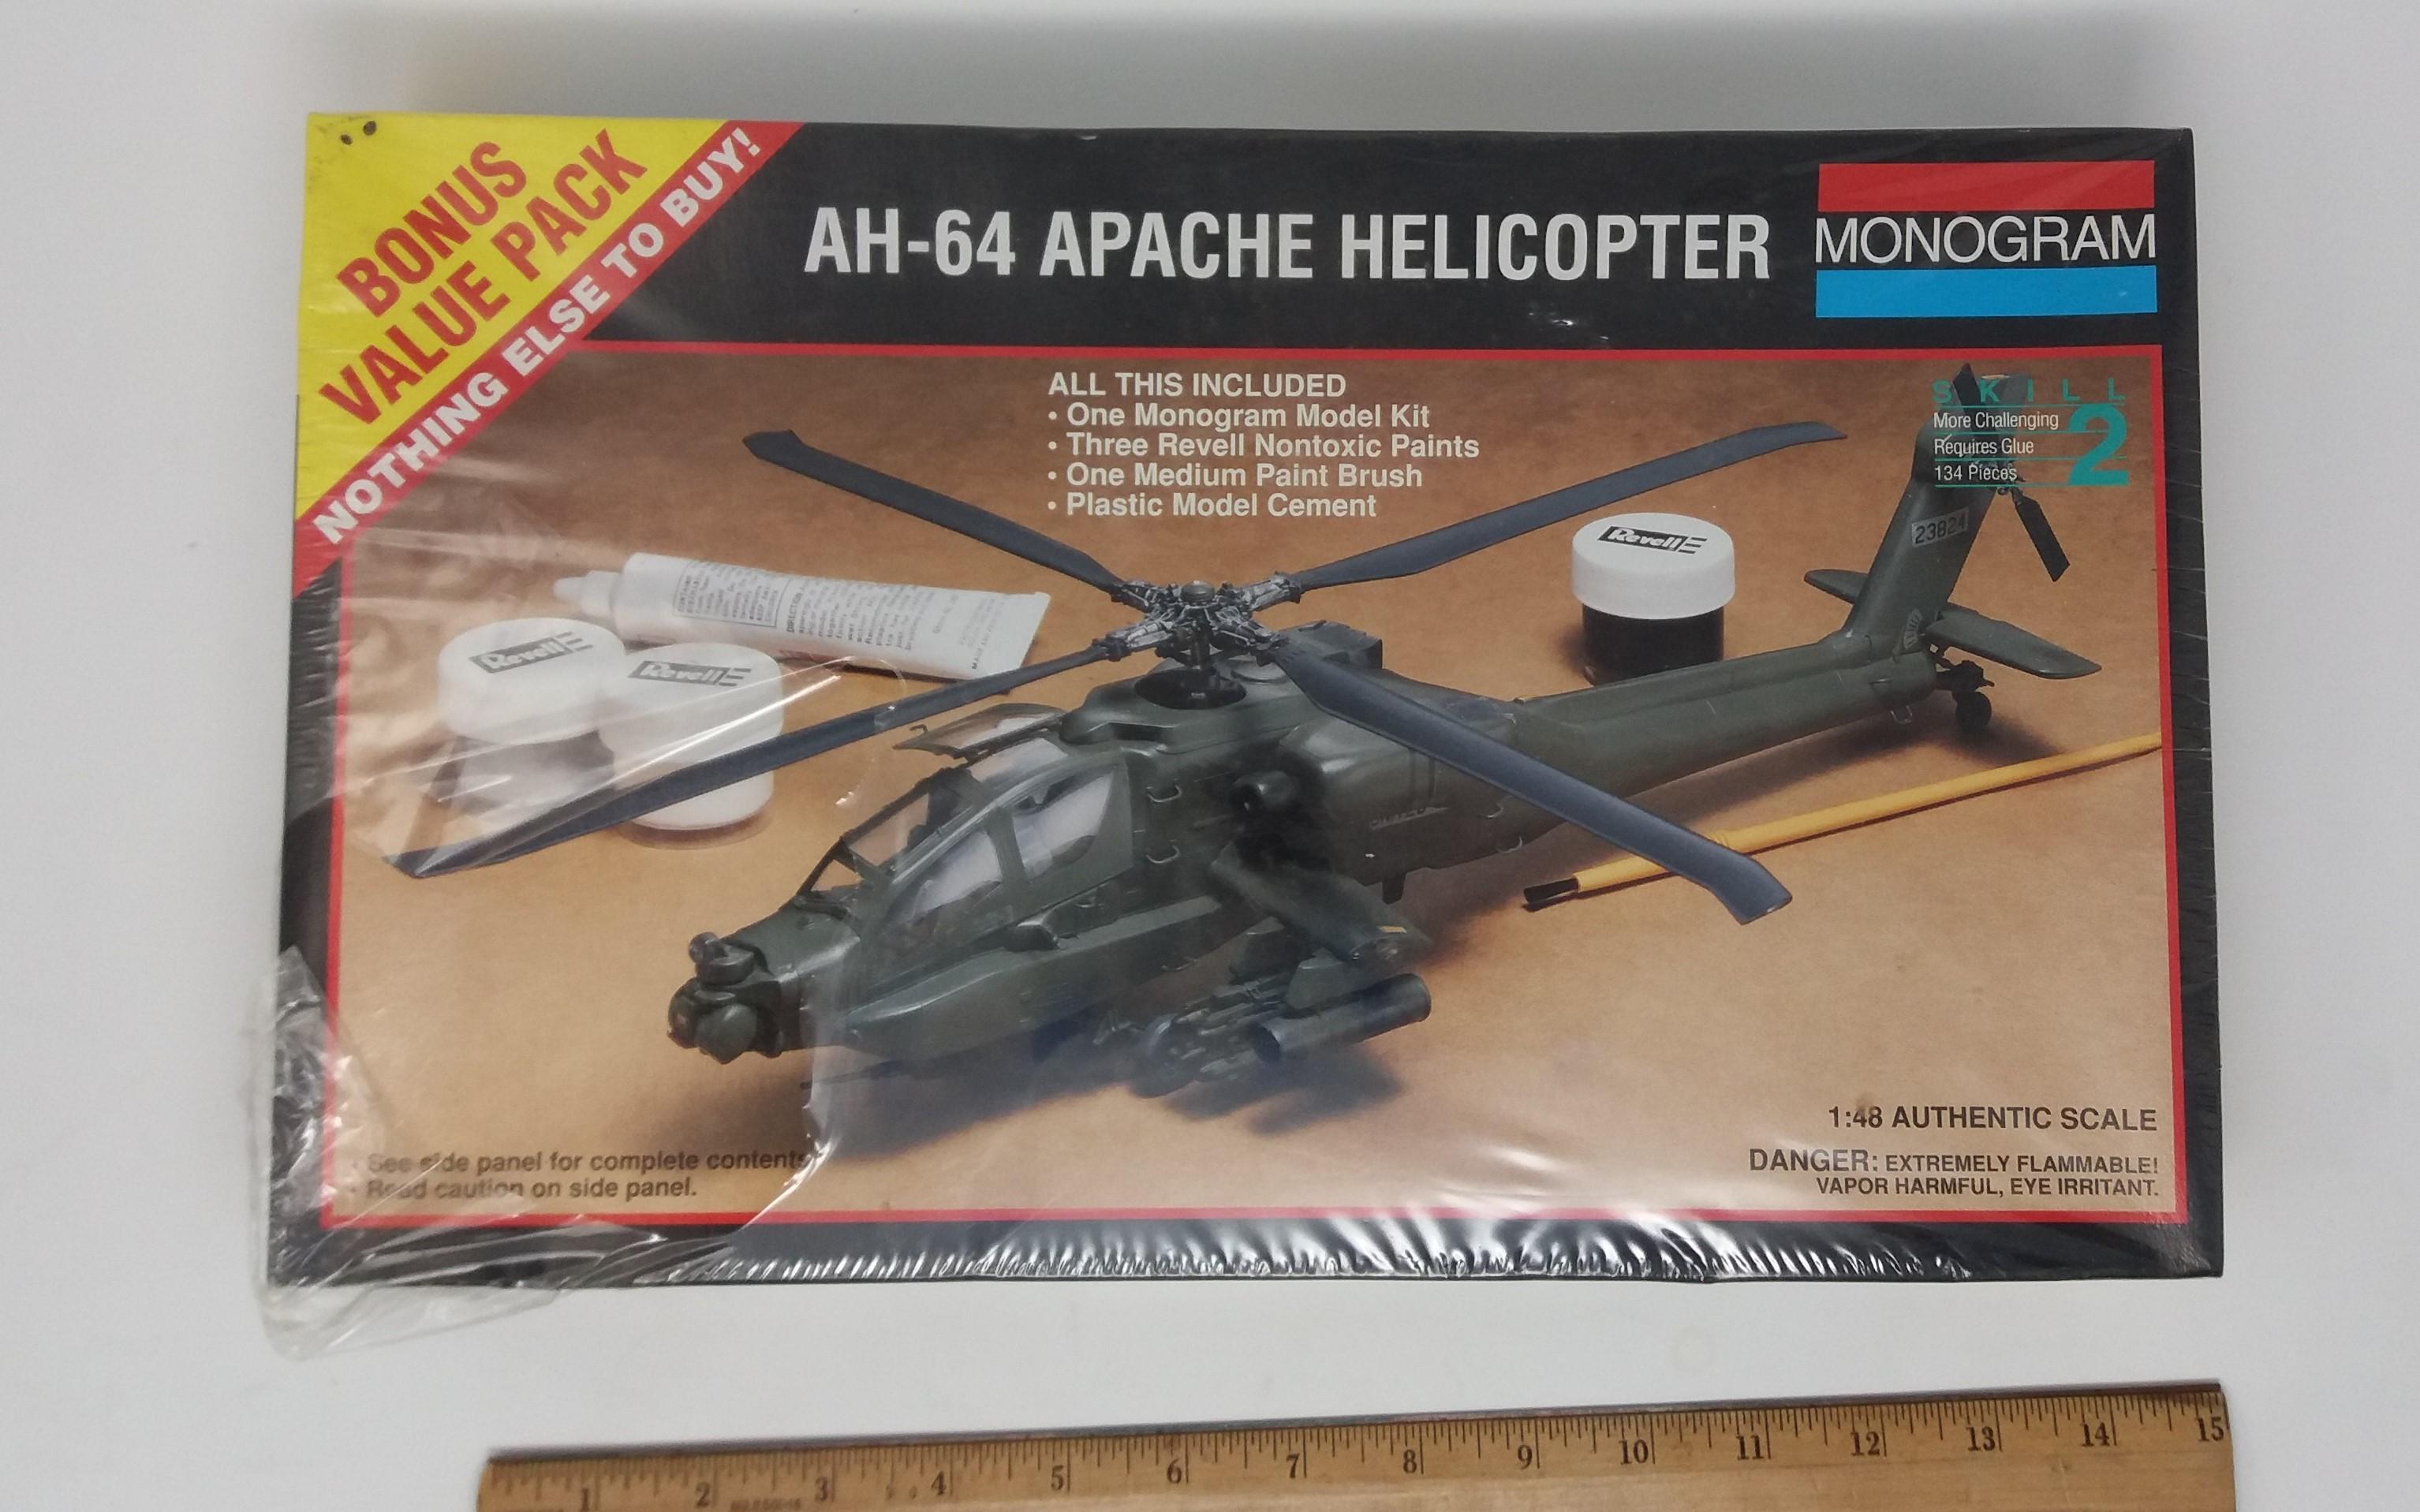 1/48 Scale AH 64 Apache Attack Helicopter Monogram Plastic Model Kit